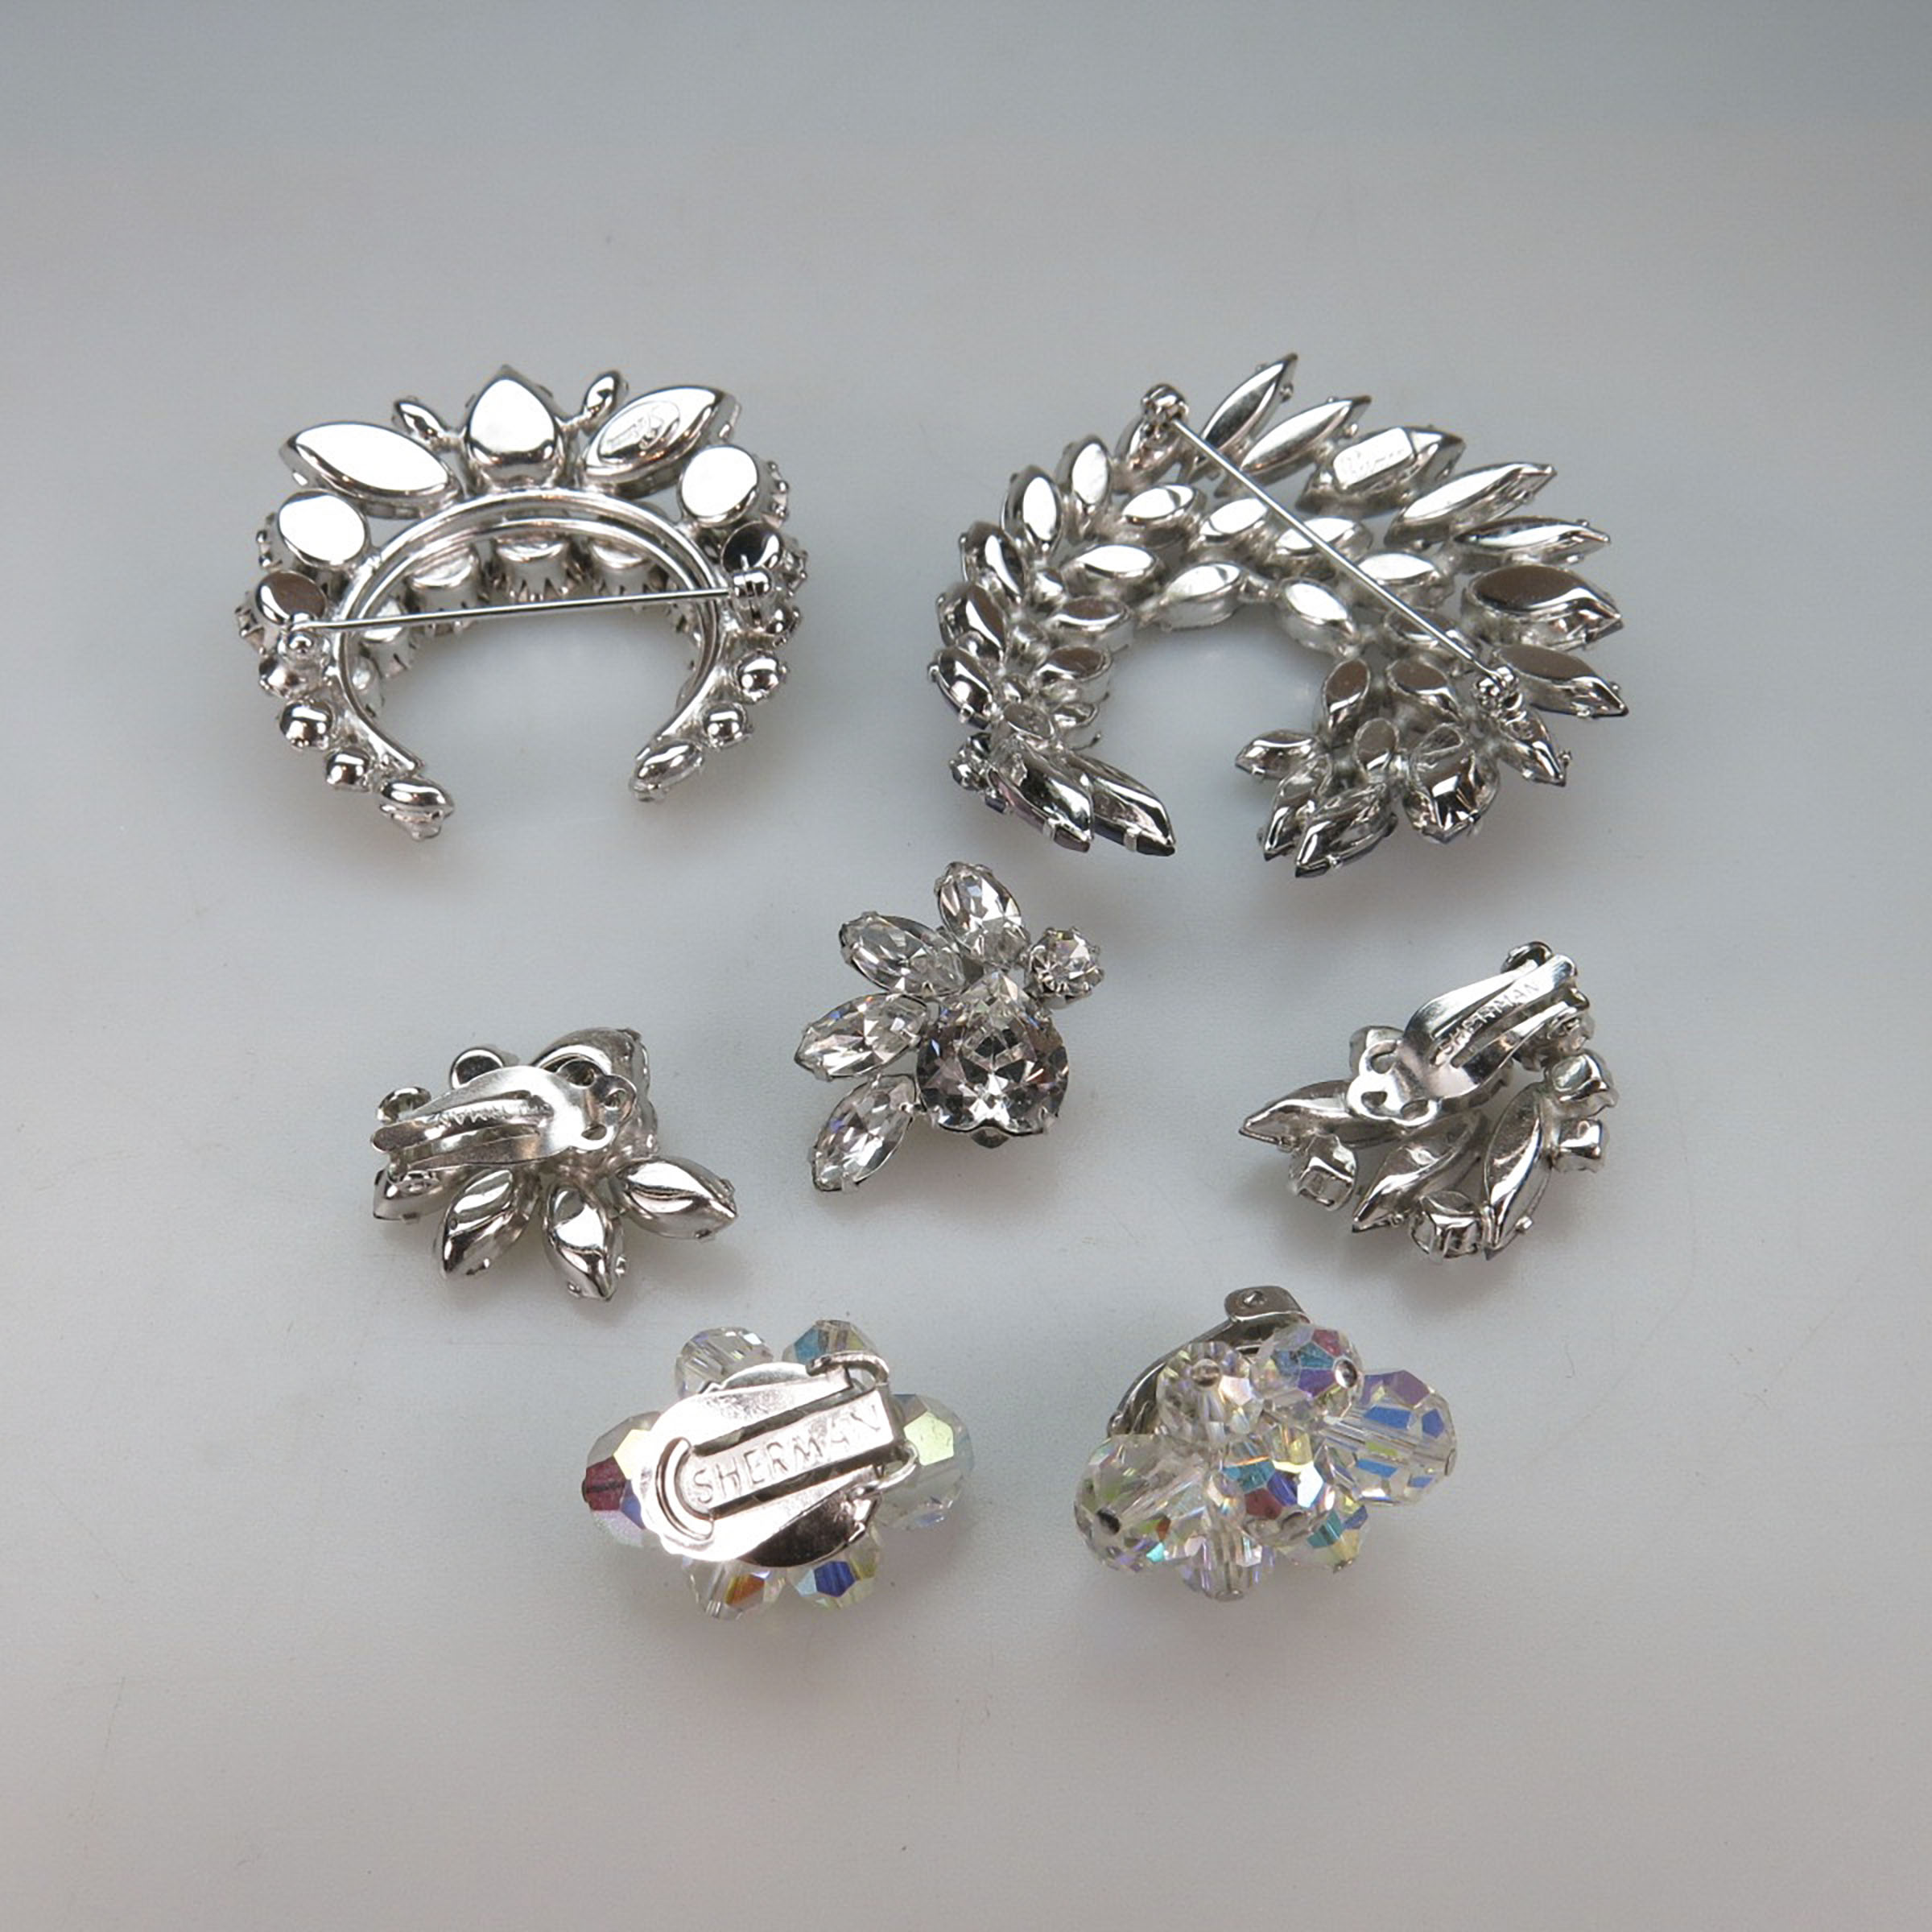 Two Sherman Silver Tone Metal Brooches, Two Pairs Of Clip-Back Earrings, & A Single Earring